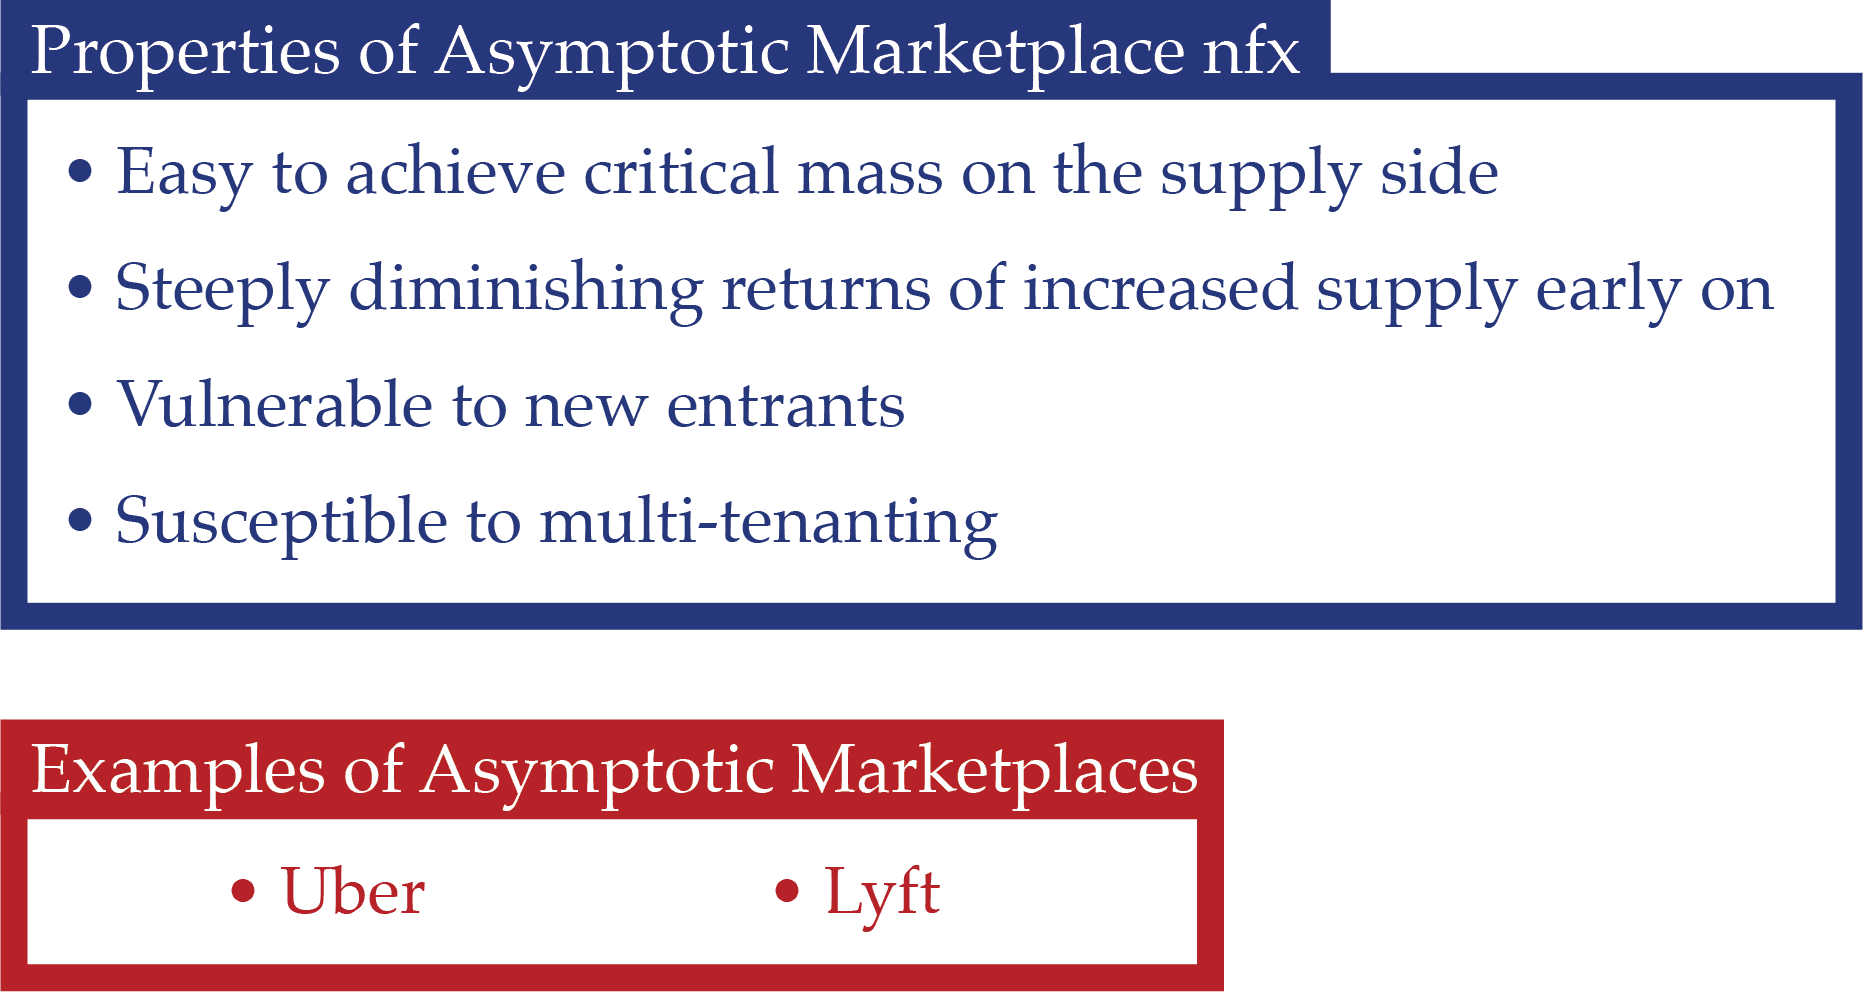 Properties and Example of Asymptotic Marketplace